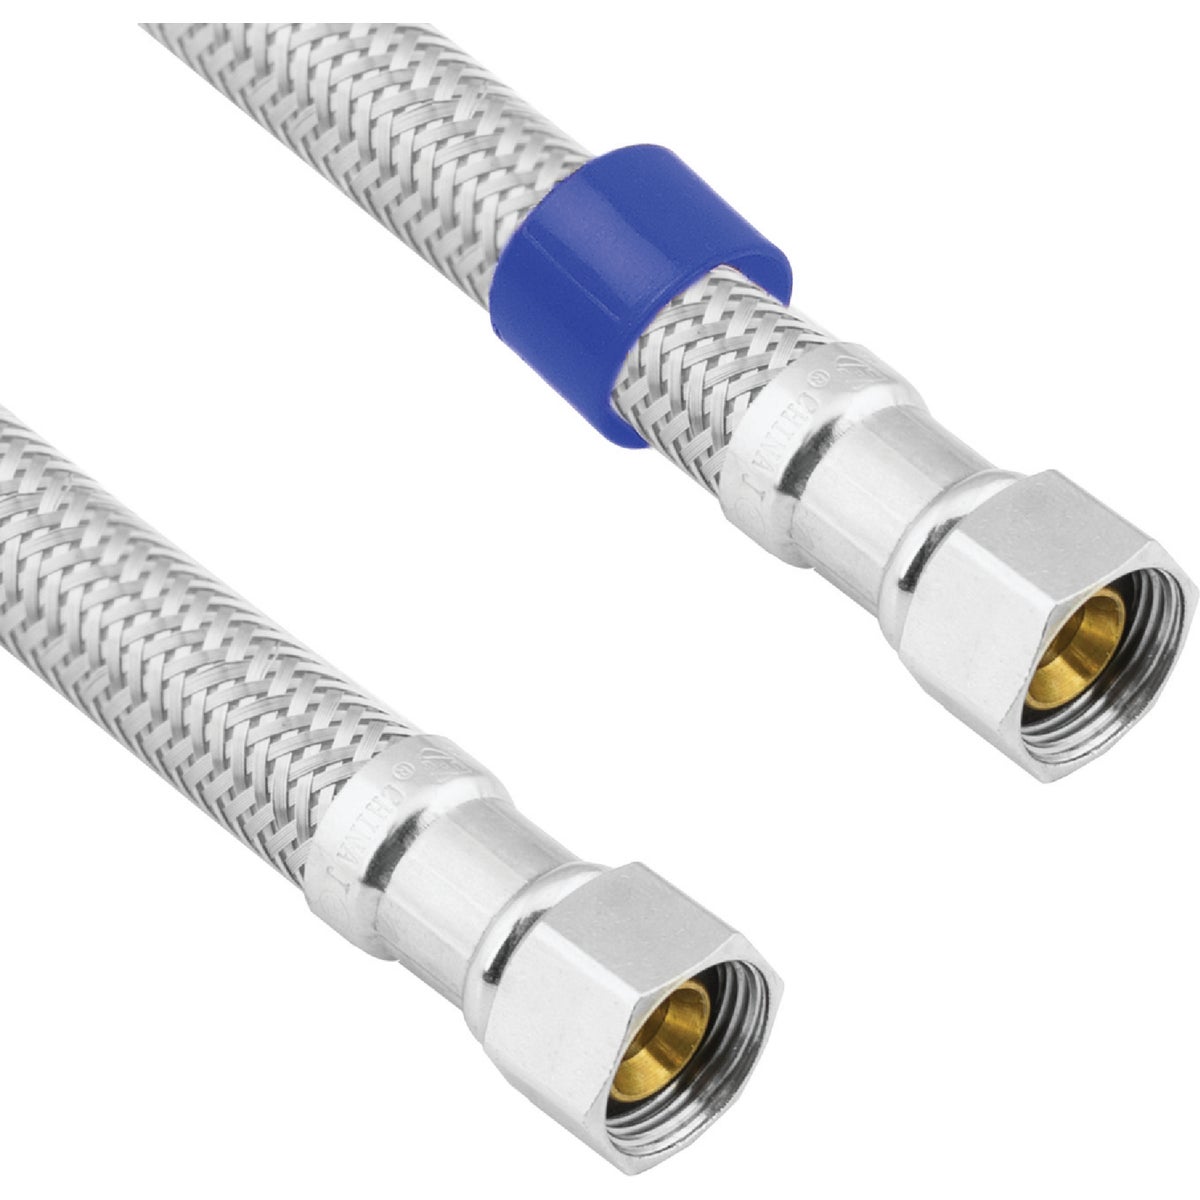 Lasco 3/8 In.C x 3/8 In.C x 12 In. L Braided Stainless Steel Flex Line Appliance Water Connector